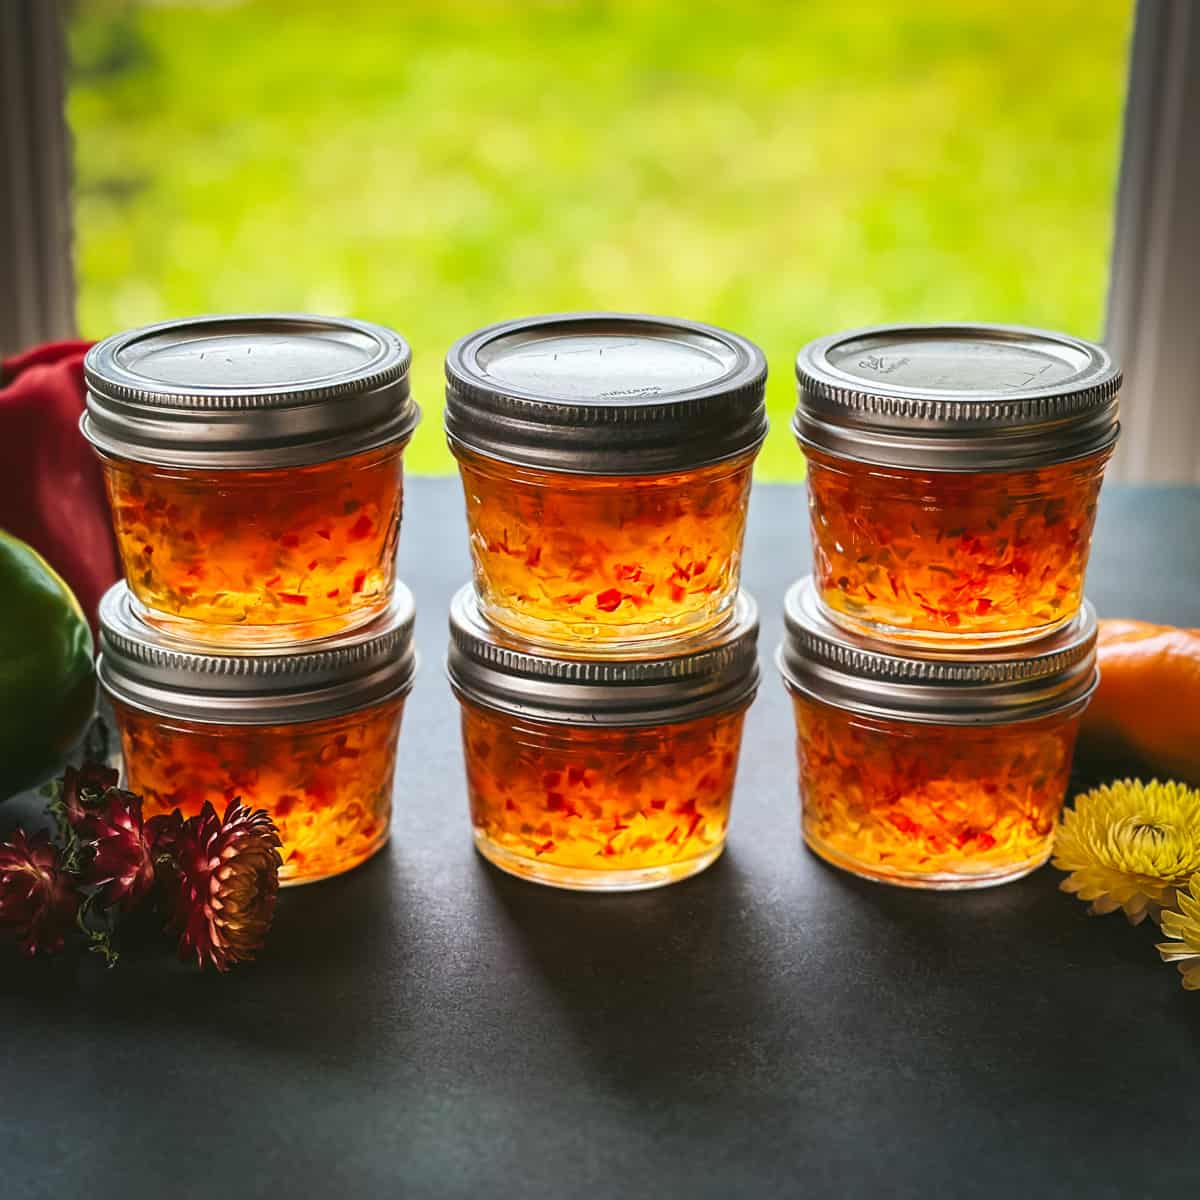 6 small jars of pepper jelly in stacks of 2, with a window in the background letting natural light through the pepper jelly. 